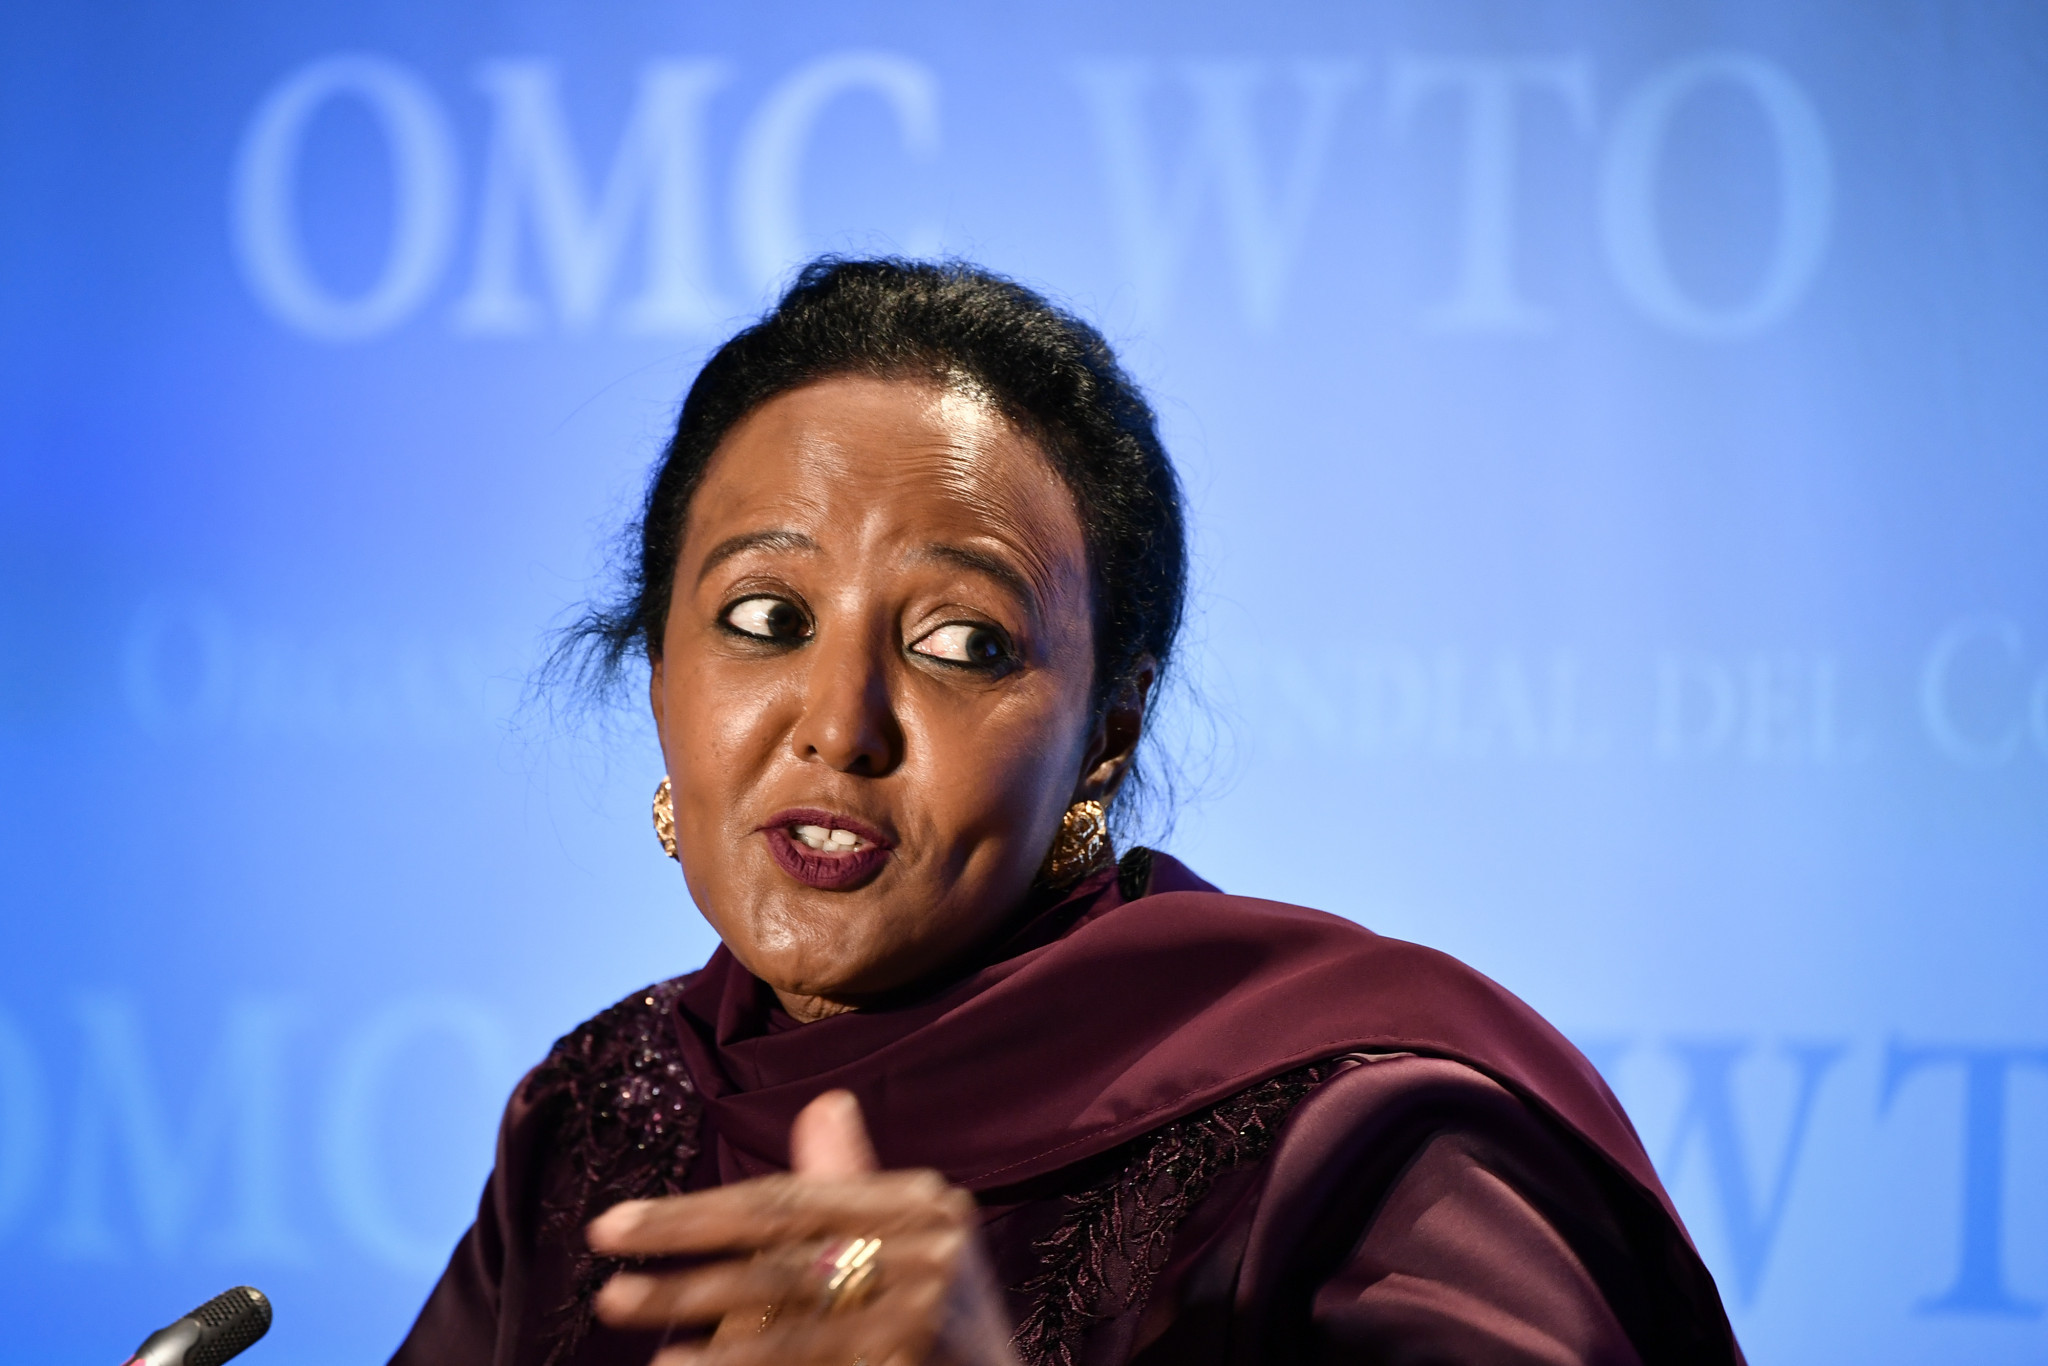 Kenya's ministry of sports, culture and heritage cabinet secretary Amina Mohamed said its athletes 